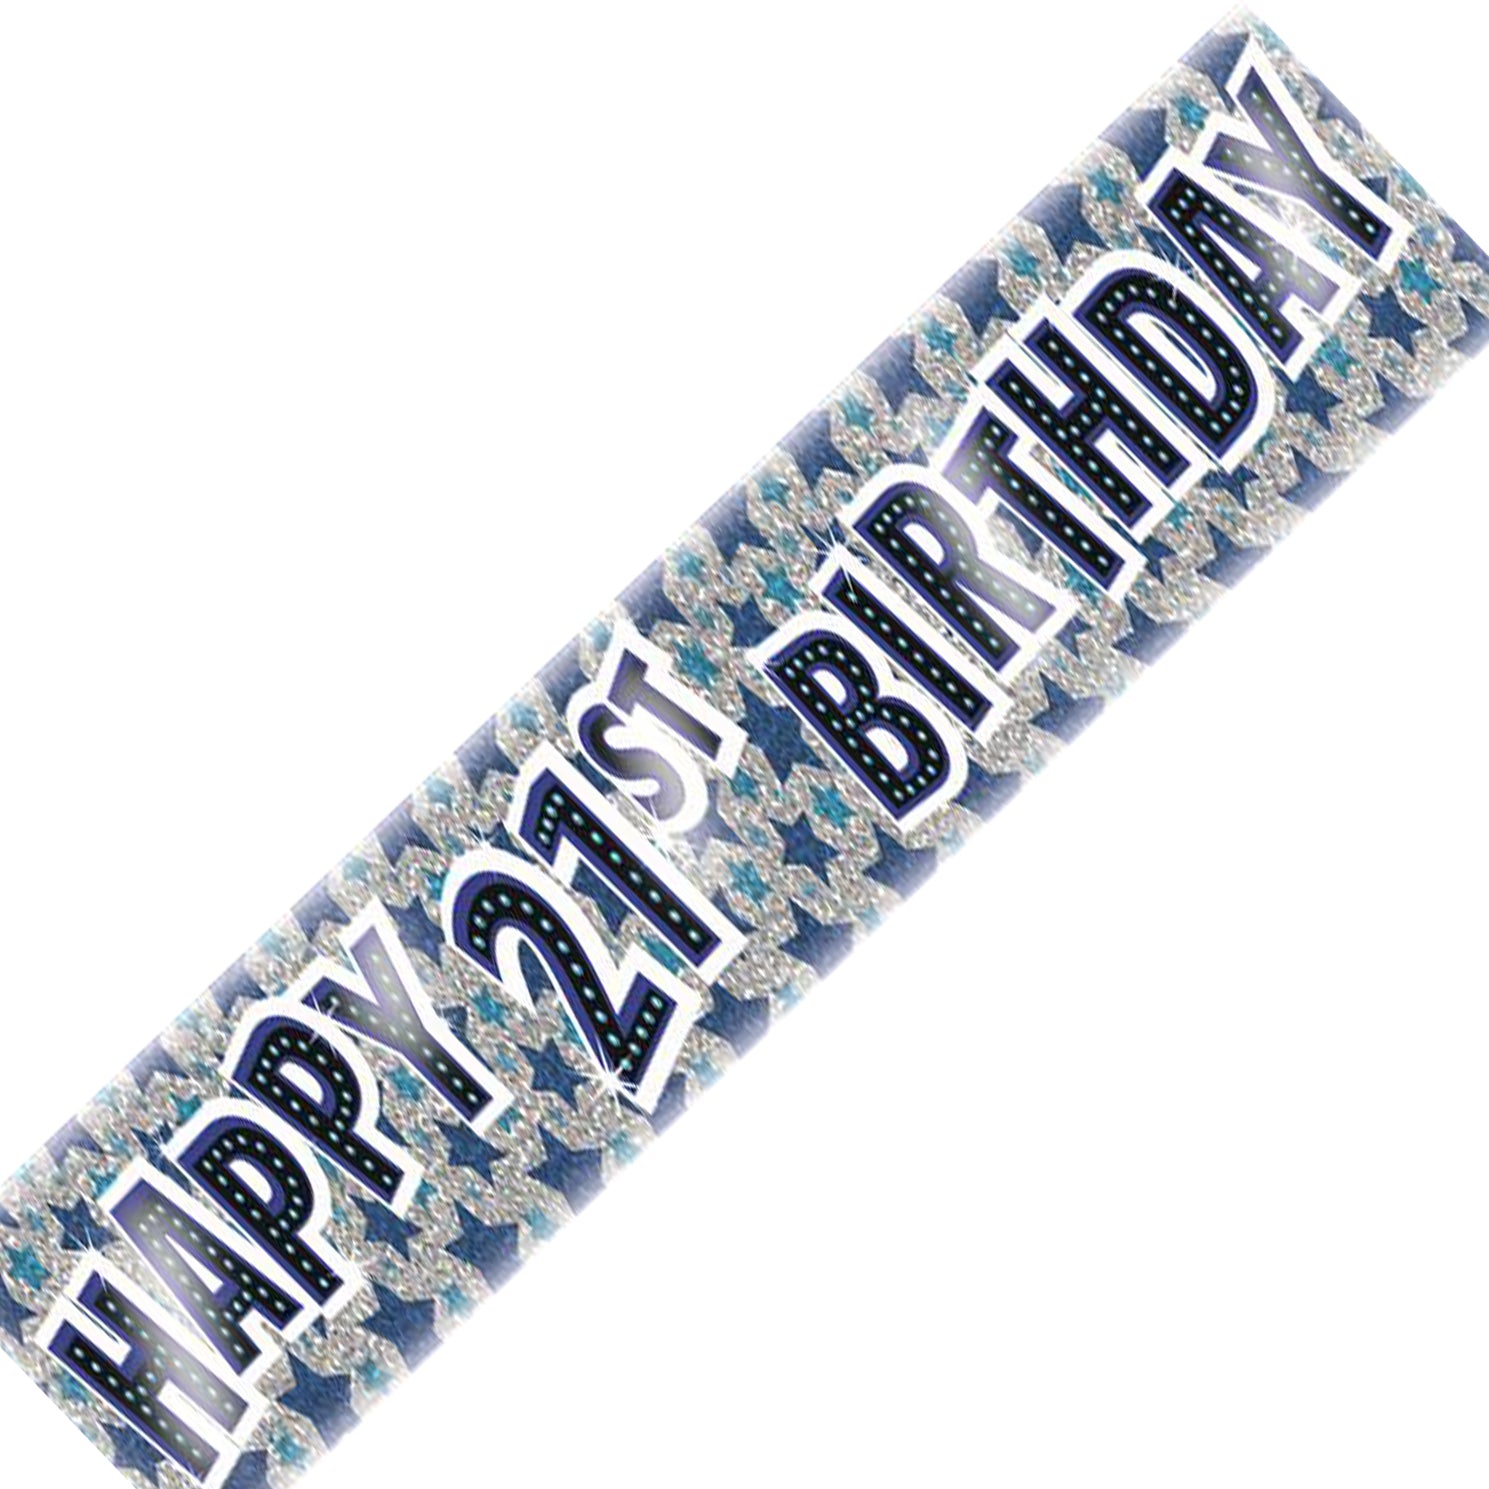 Age 21 Birthday Banner Blue And Silver Star Holographic Recyclable 21st Birthday Party Banner